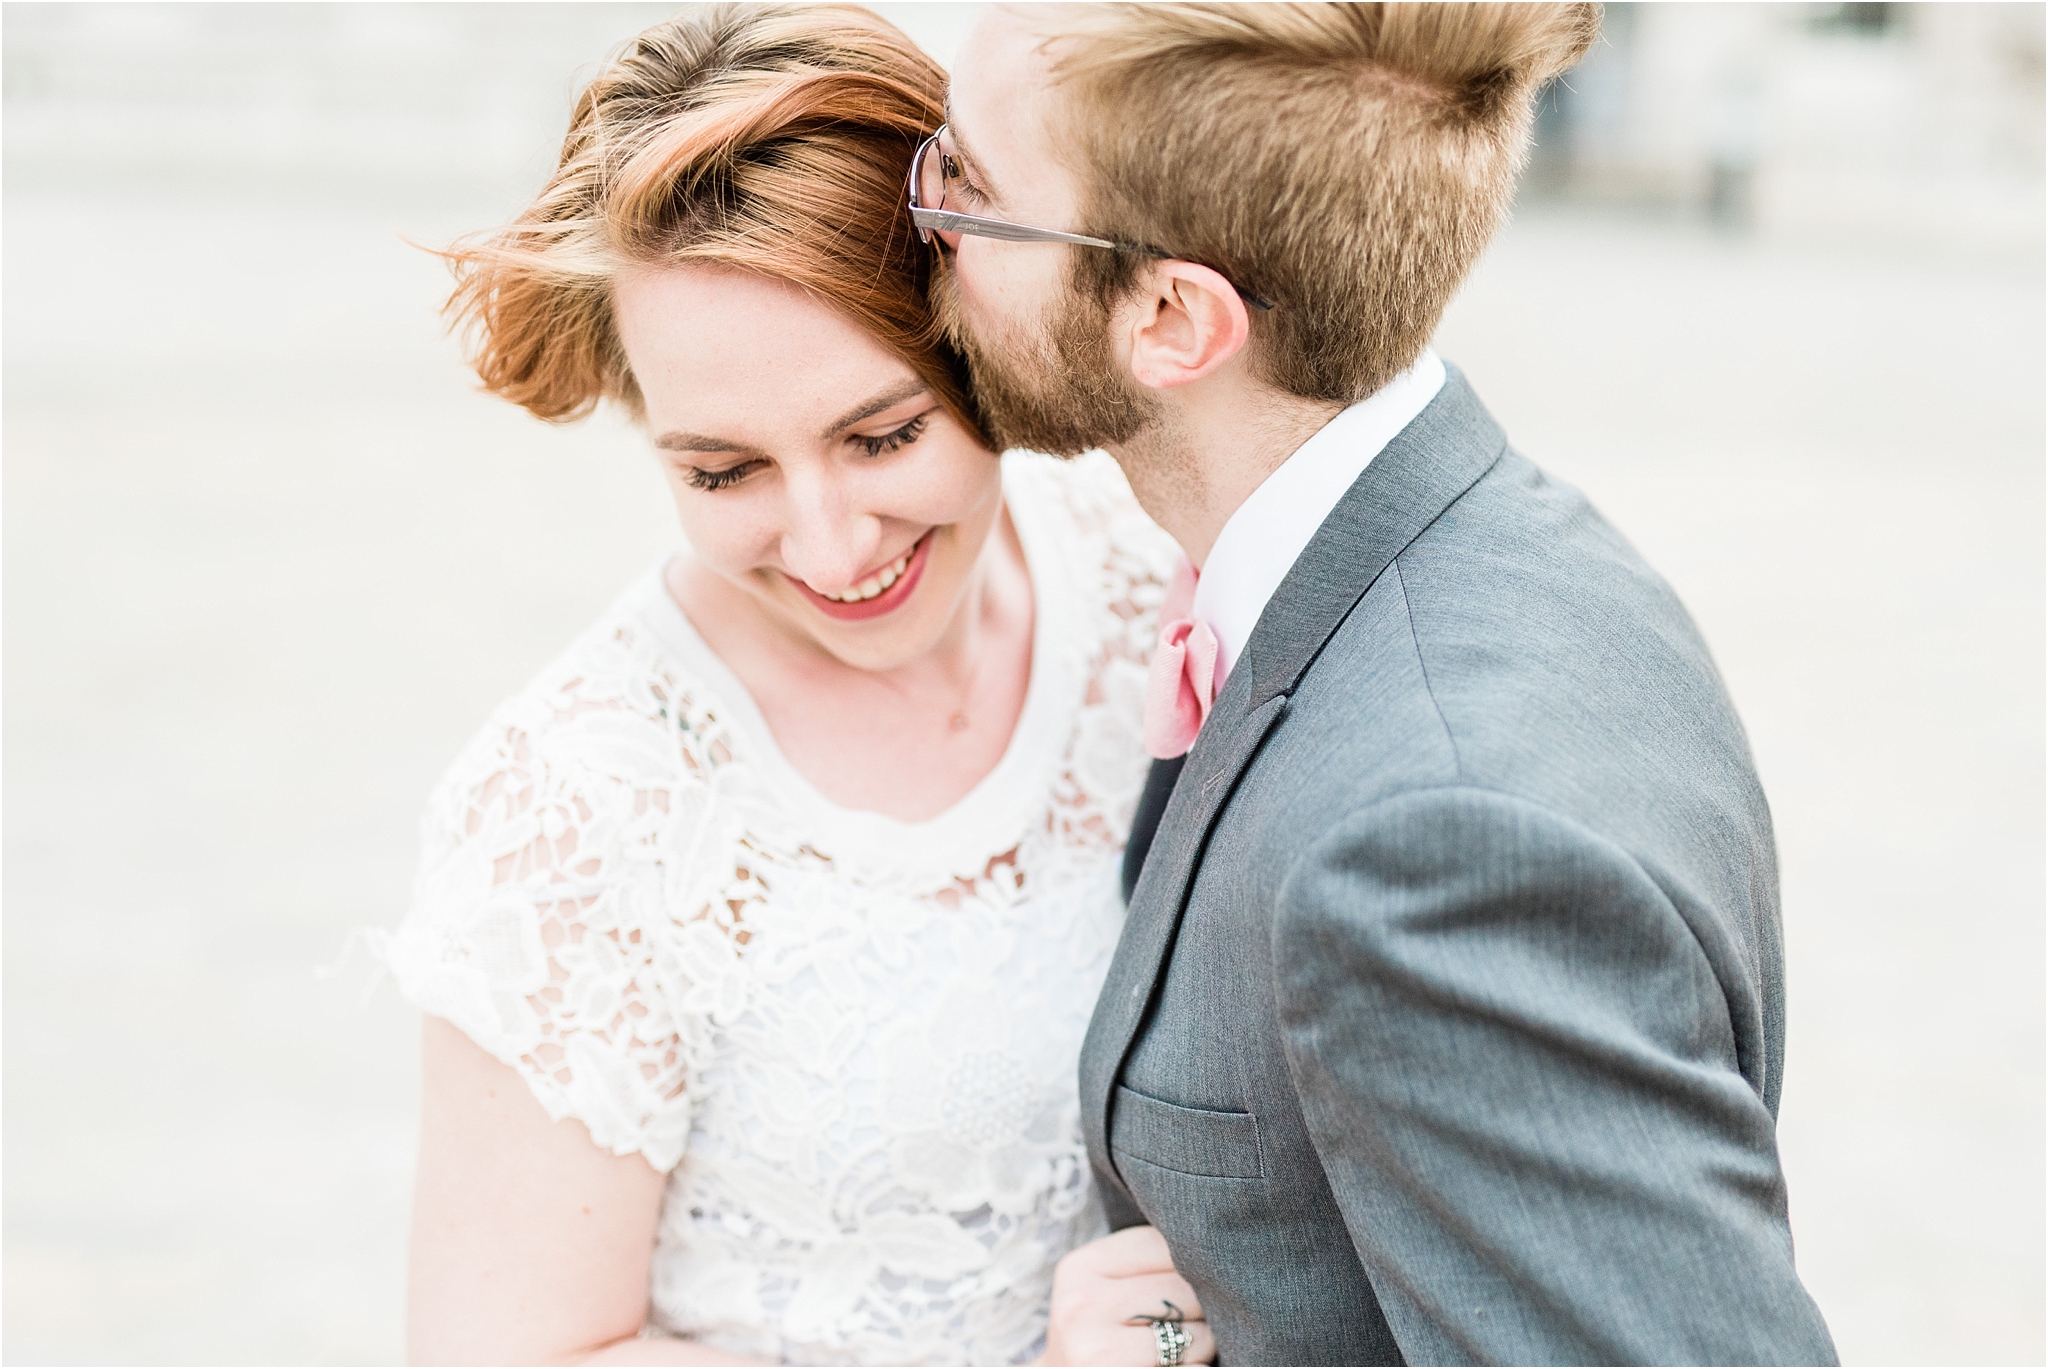 London Sweetheart Session by Tucson Wedding Photographer